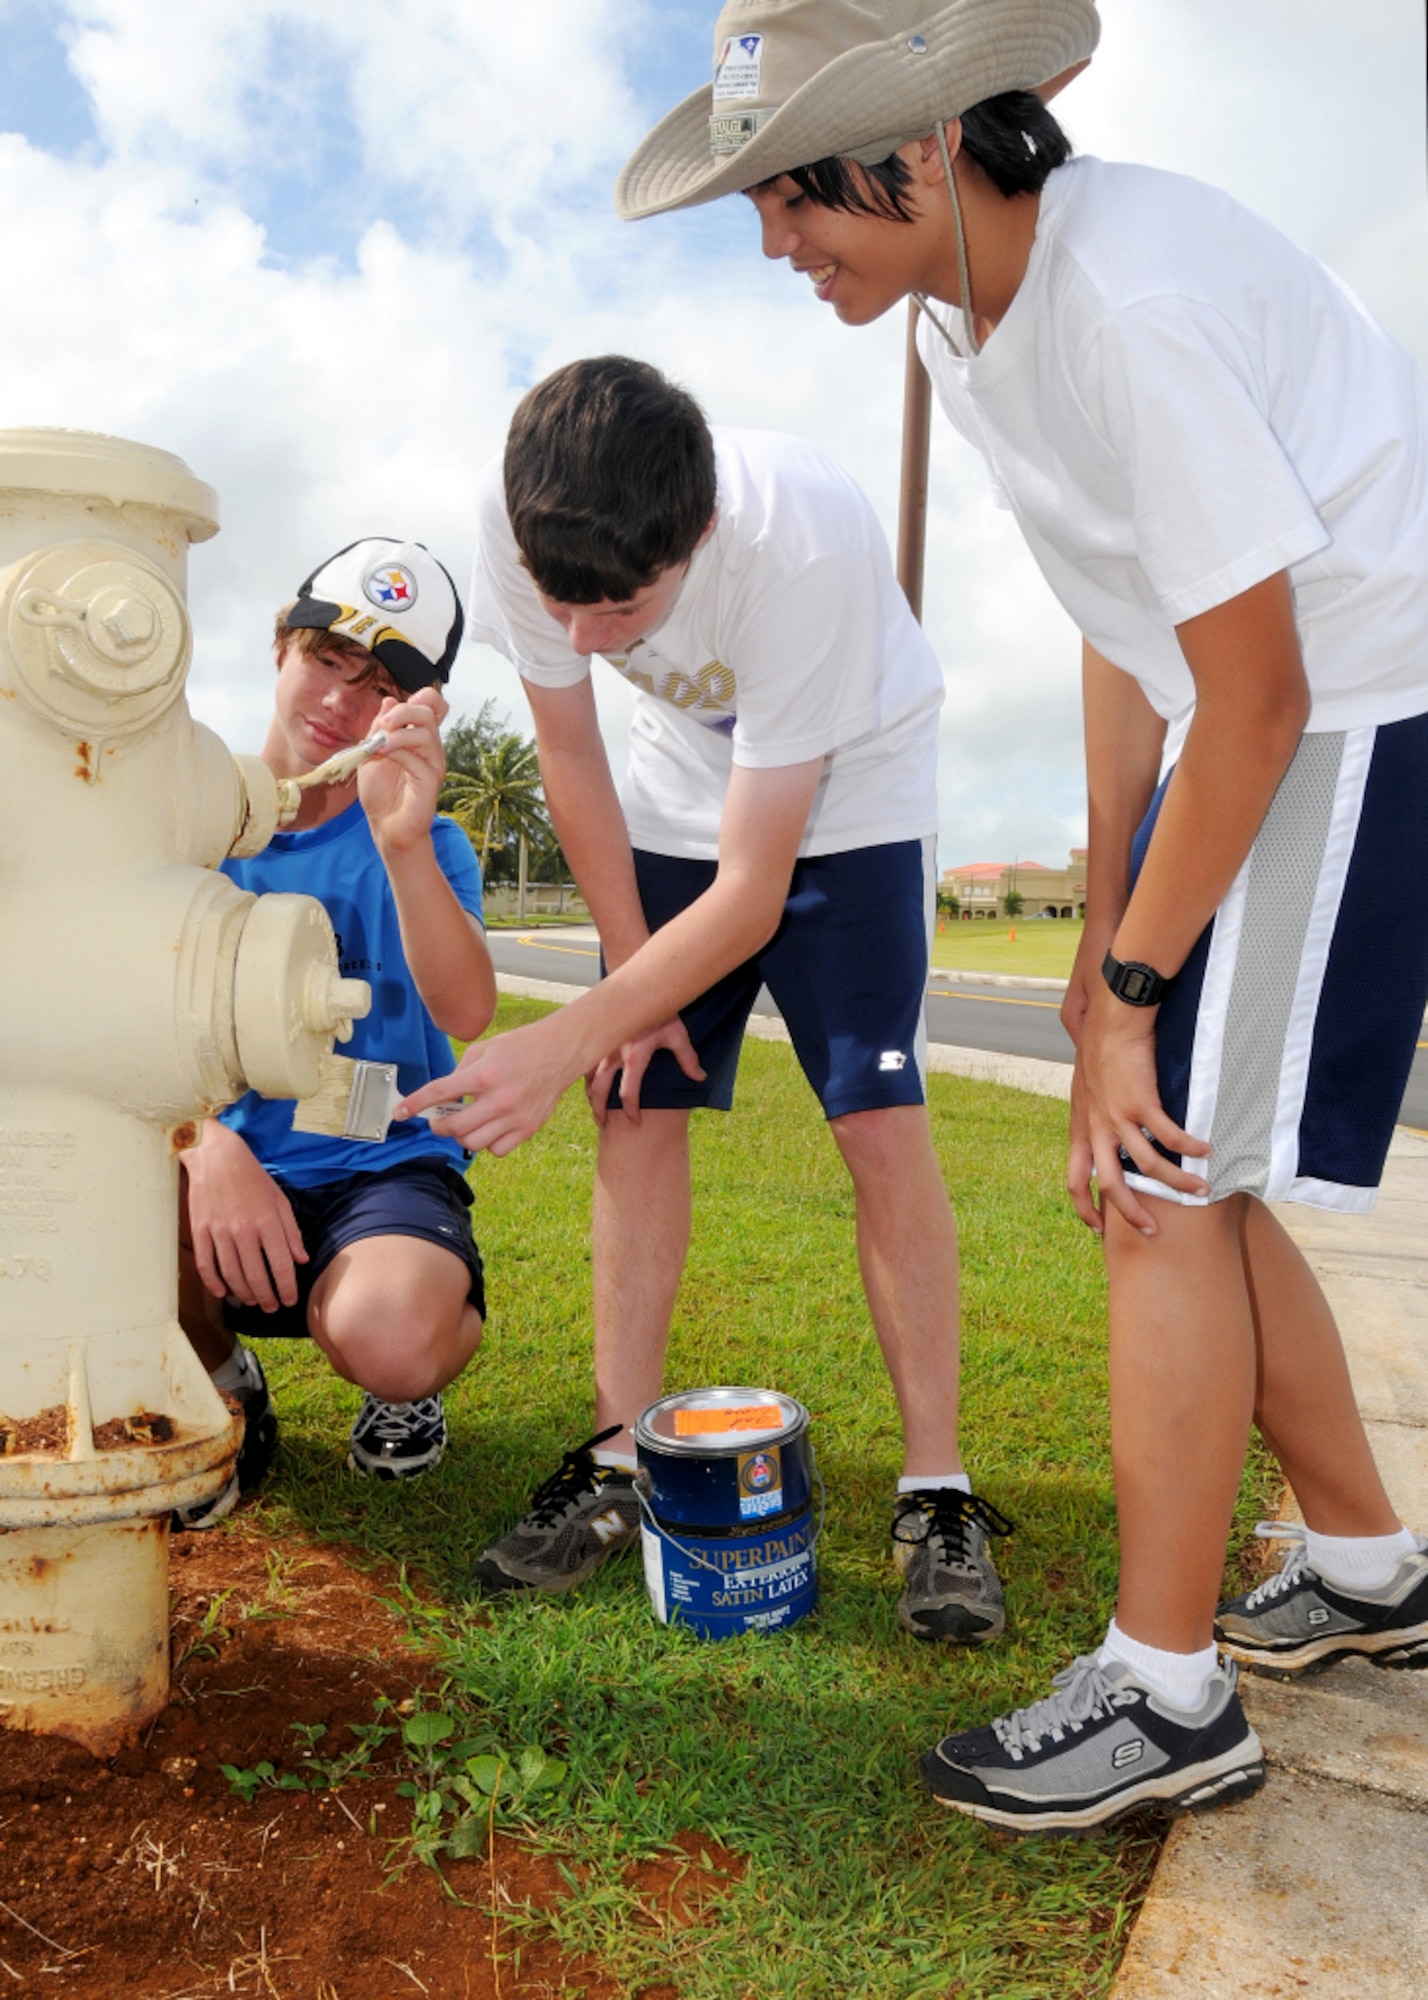 ANDERSEN AIR FORCE BASE, Guam - Members of Andersen's Troop 20 paint fire hydrants around the base Nov. 22. The boy scout troop, non-exclusive to Andersen is made up of 10 young men. The troop participates in various activities that help improve Andersen such as conducting quarterly cleanup of the “Ole 100” display and  the monthly beach clean up. (U.S. Air Force photo by Senior Airman Nichelle Griffiths)